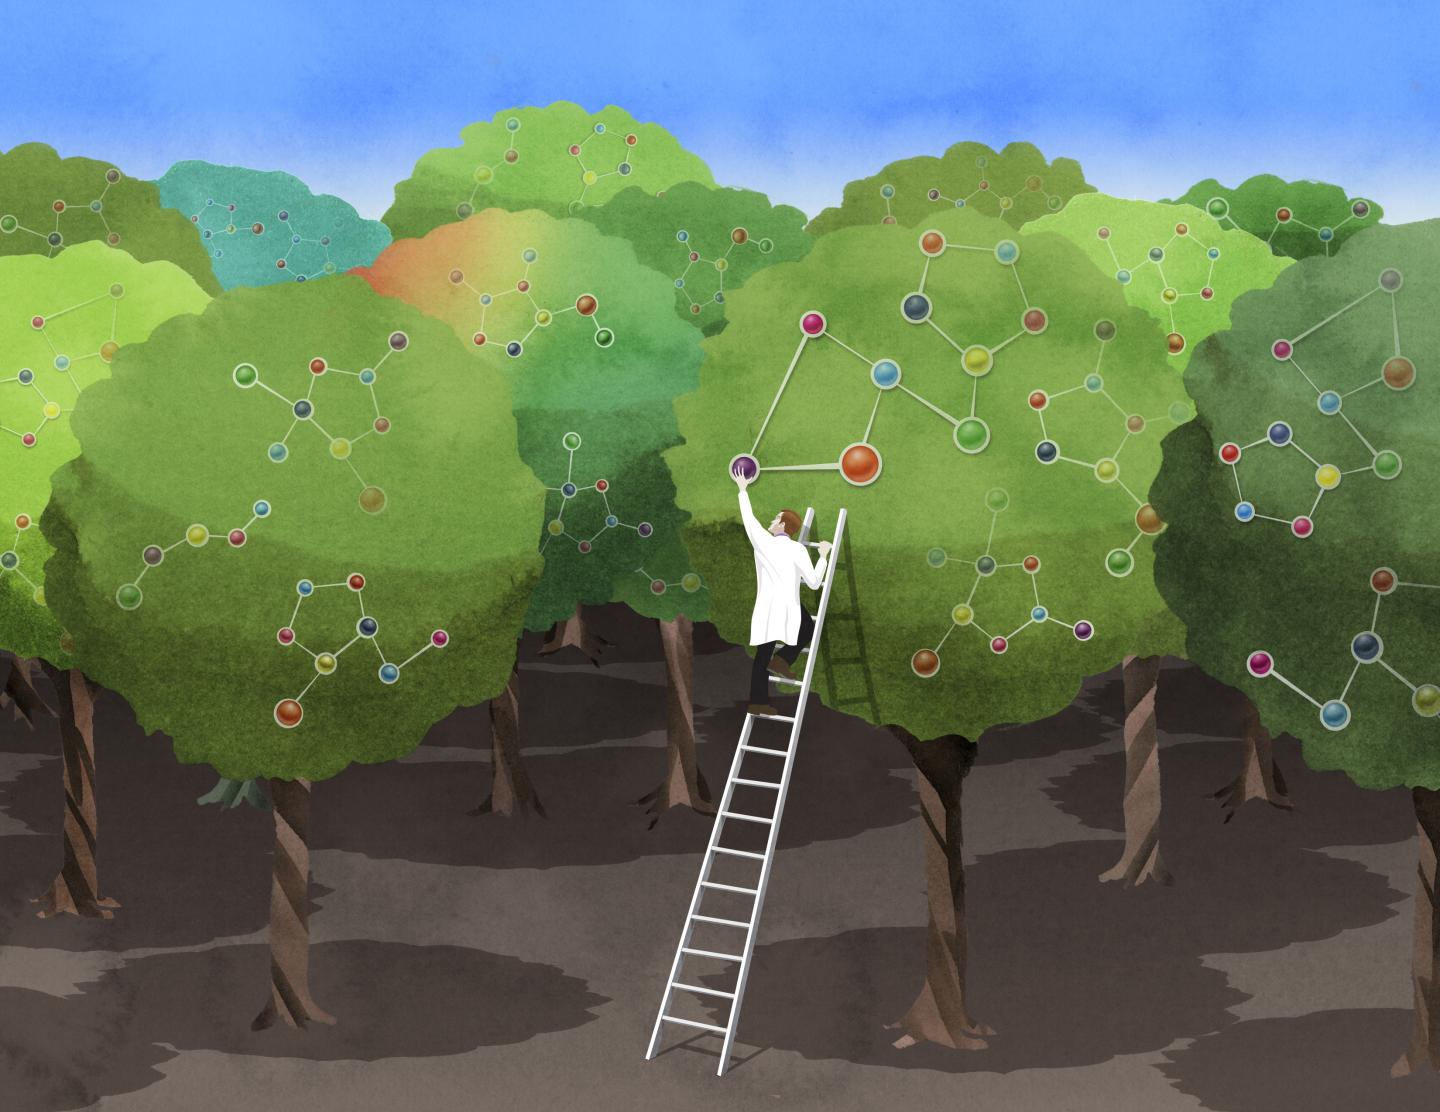 Scientist Picking Molecules from a Tree